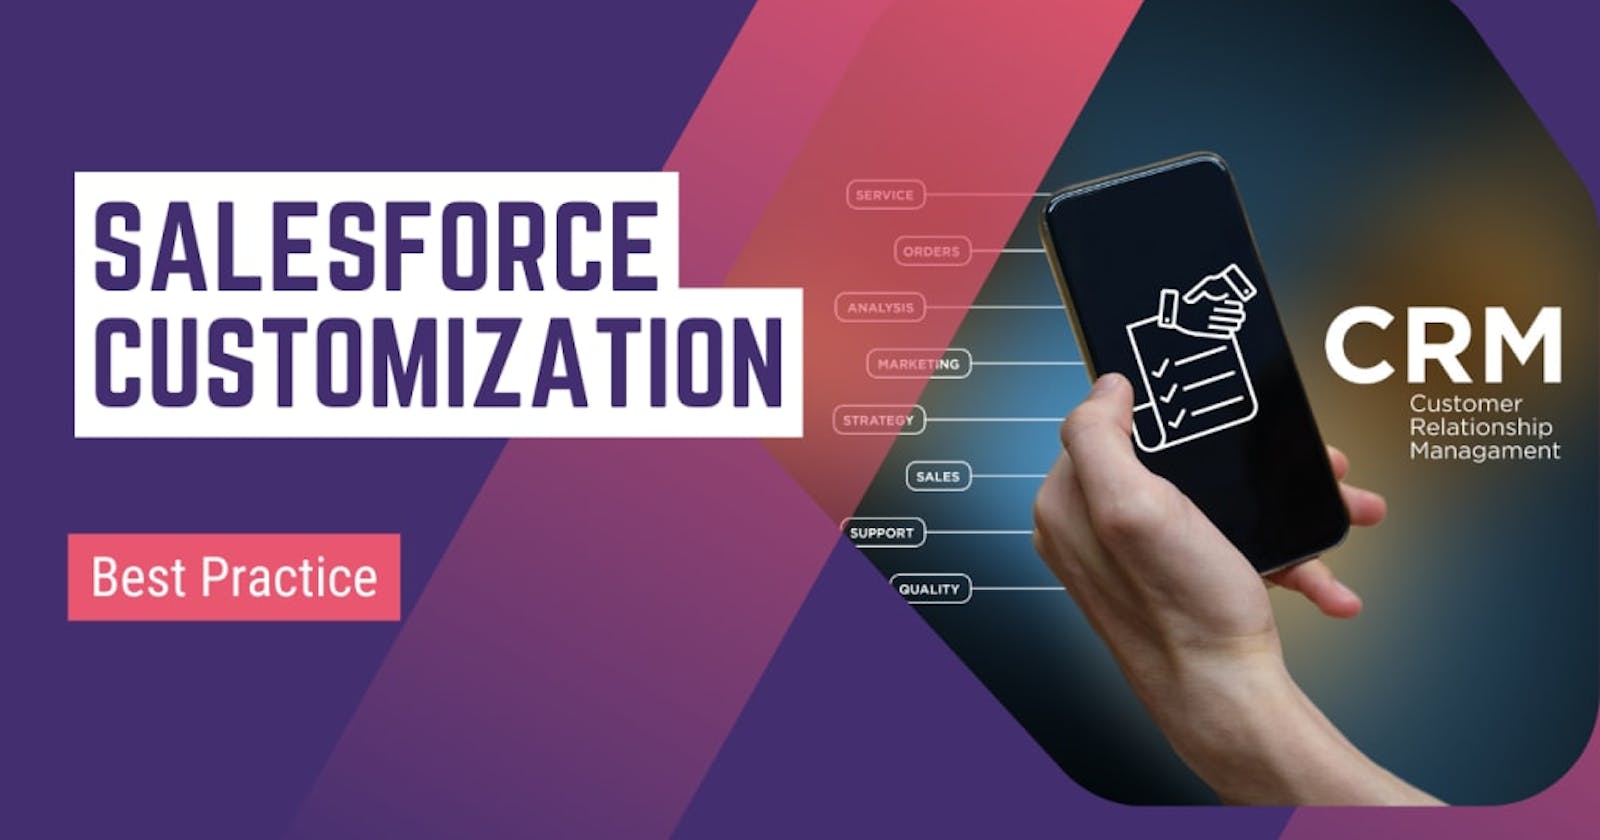 Top 8 Salesforce Customization Practices and Their Advantages